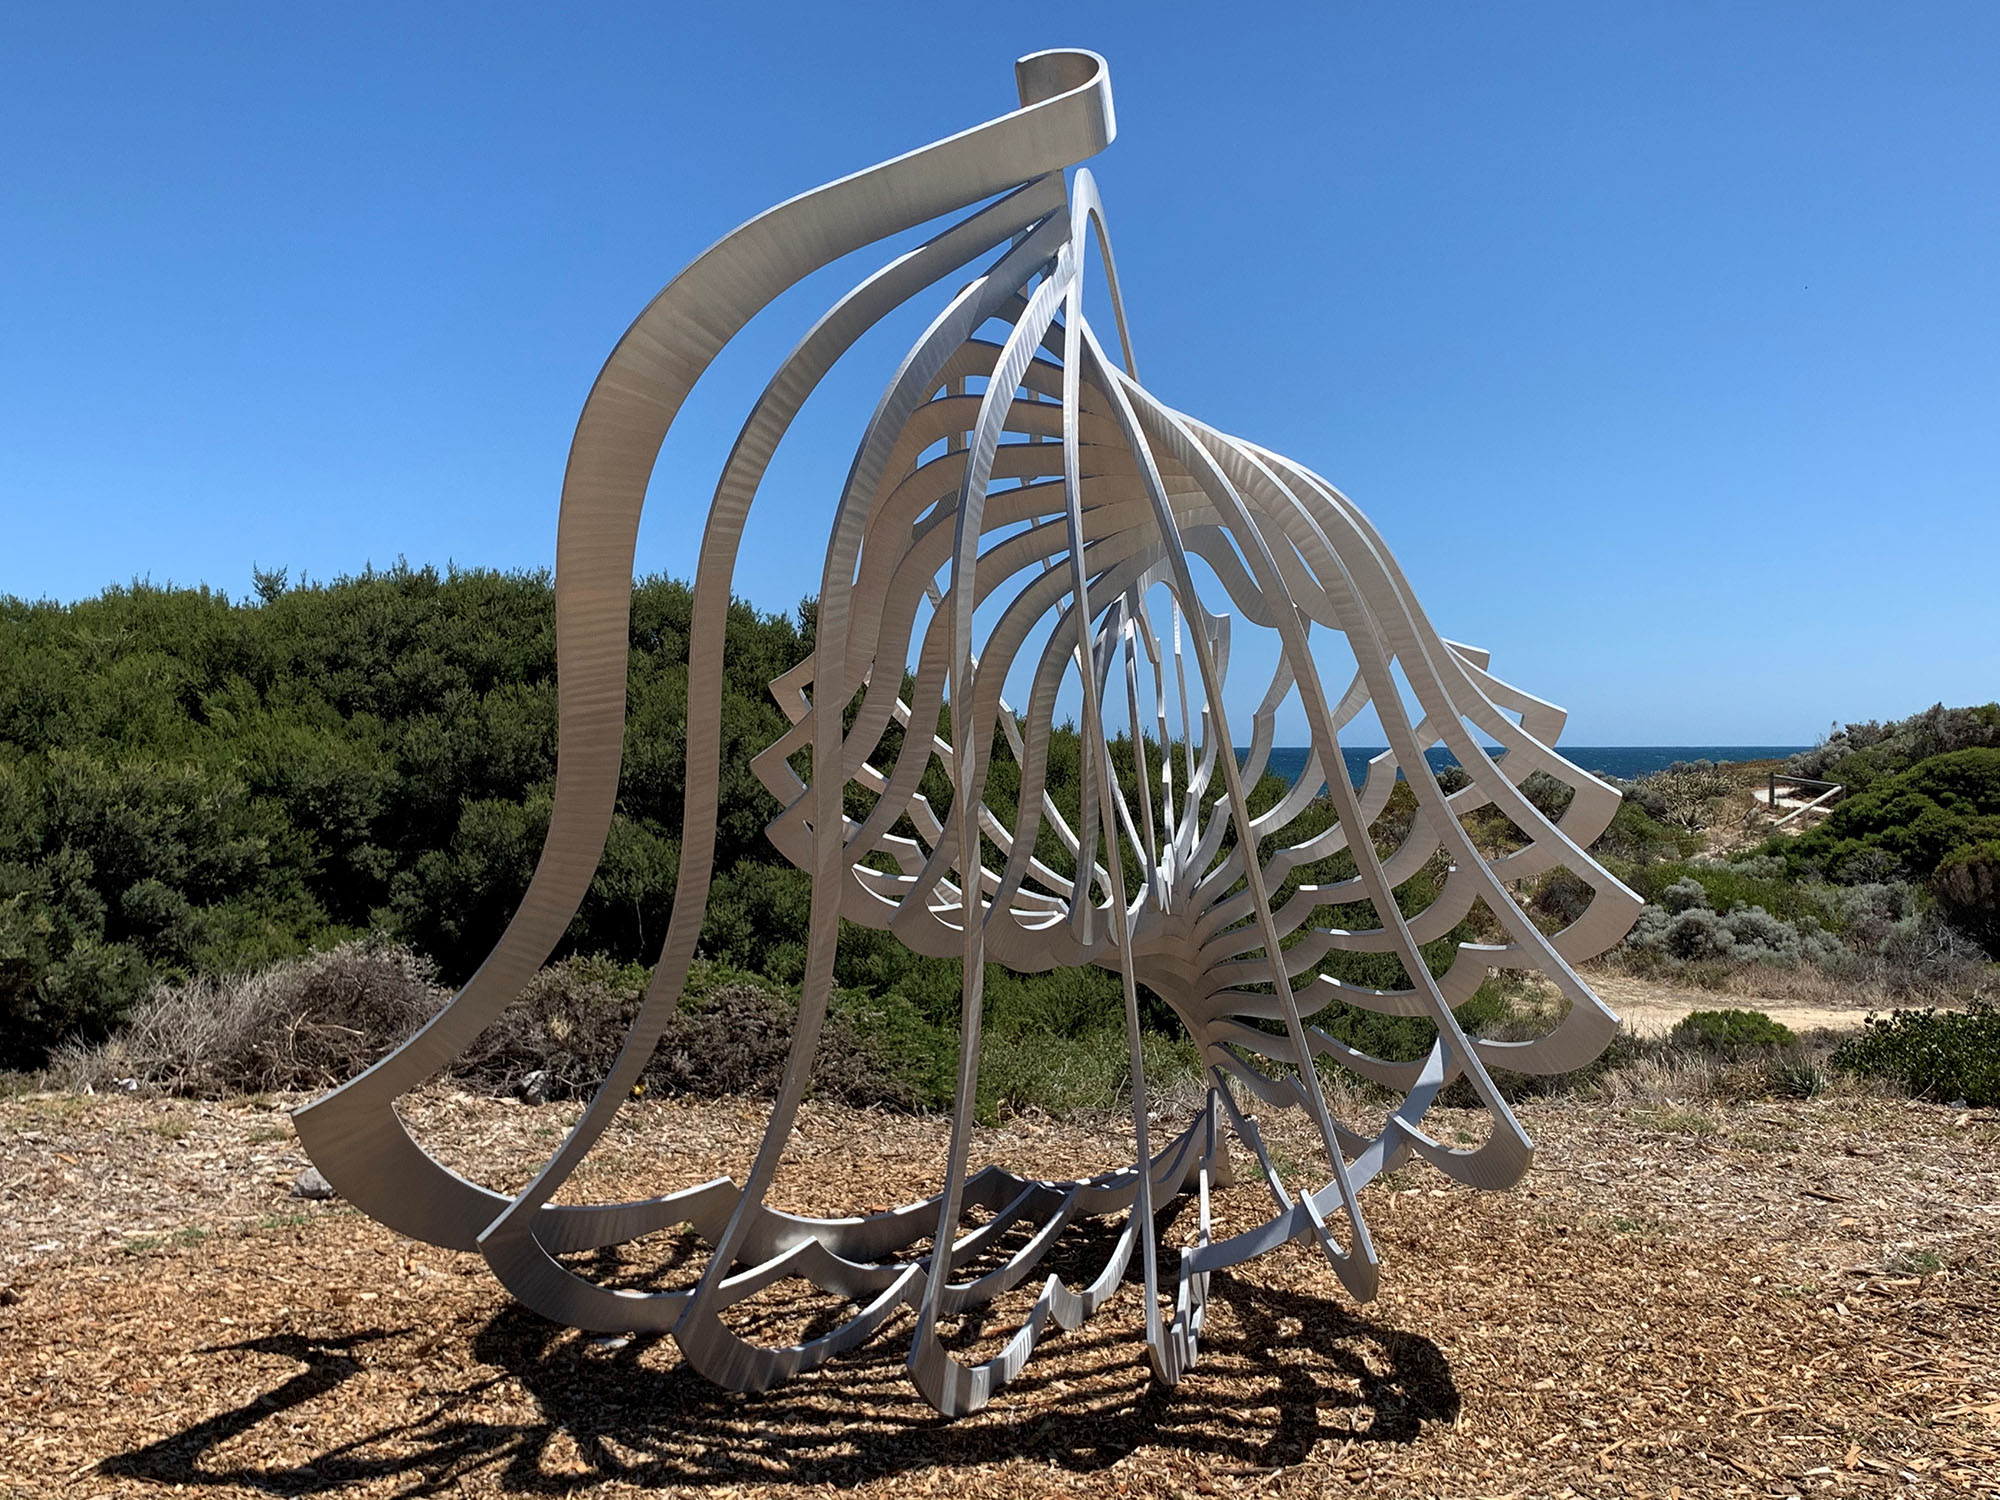 She Sells Sea Shells joins the Cottesloe Collection: - Sculpture by the Sea